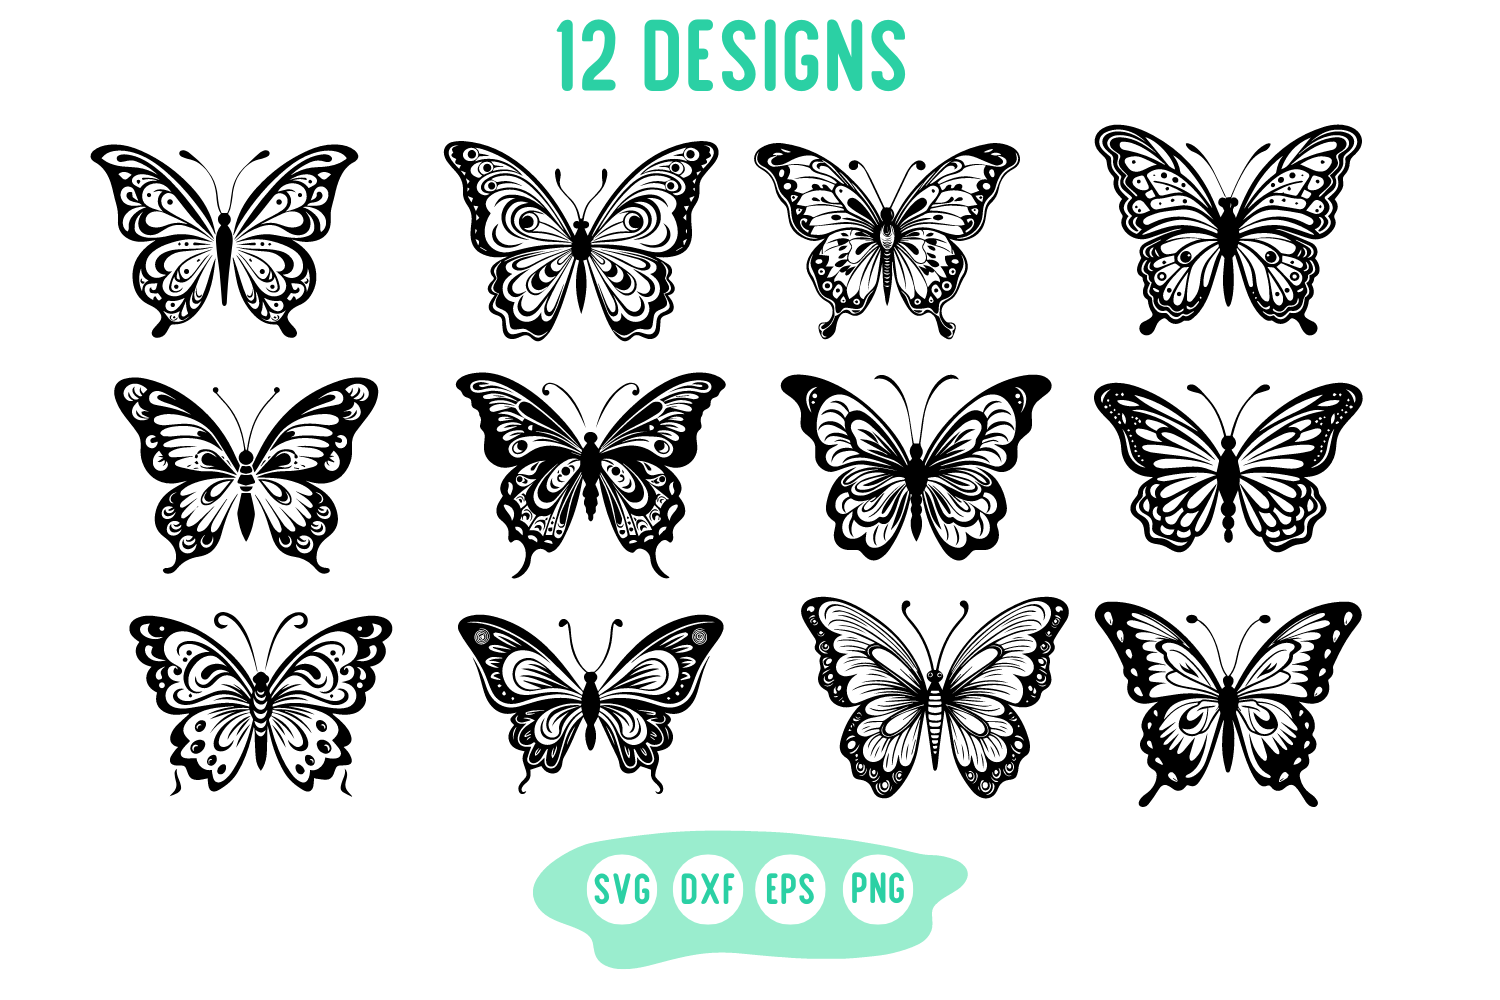 12 Designs of Butterfly Cut File Svg Graphic by Medapixel · Creative ...